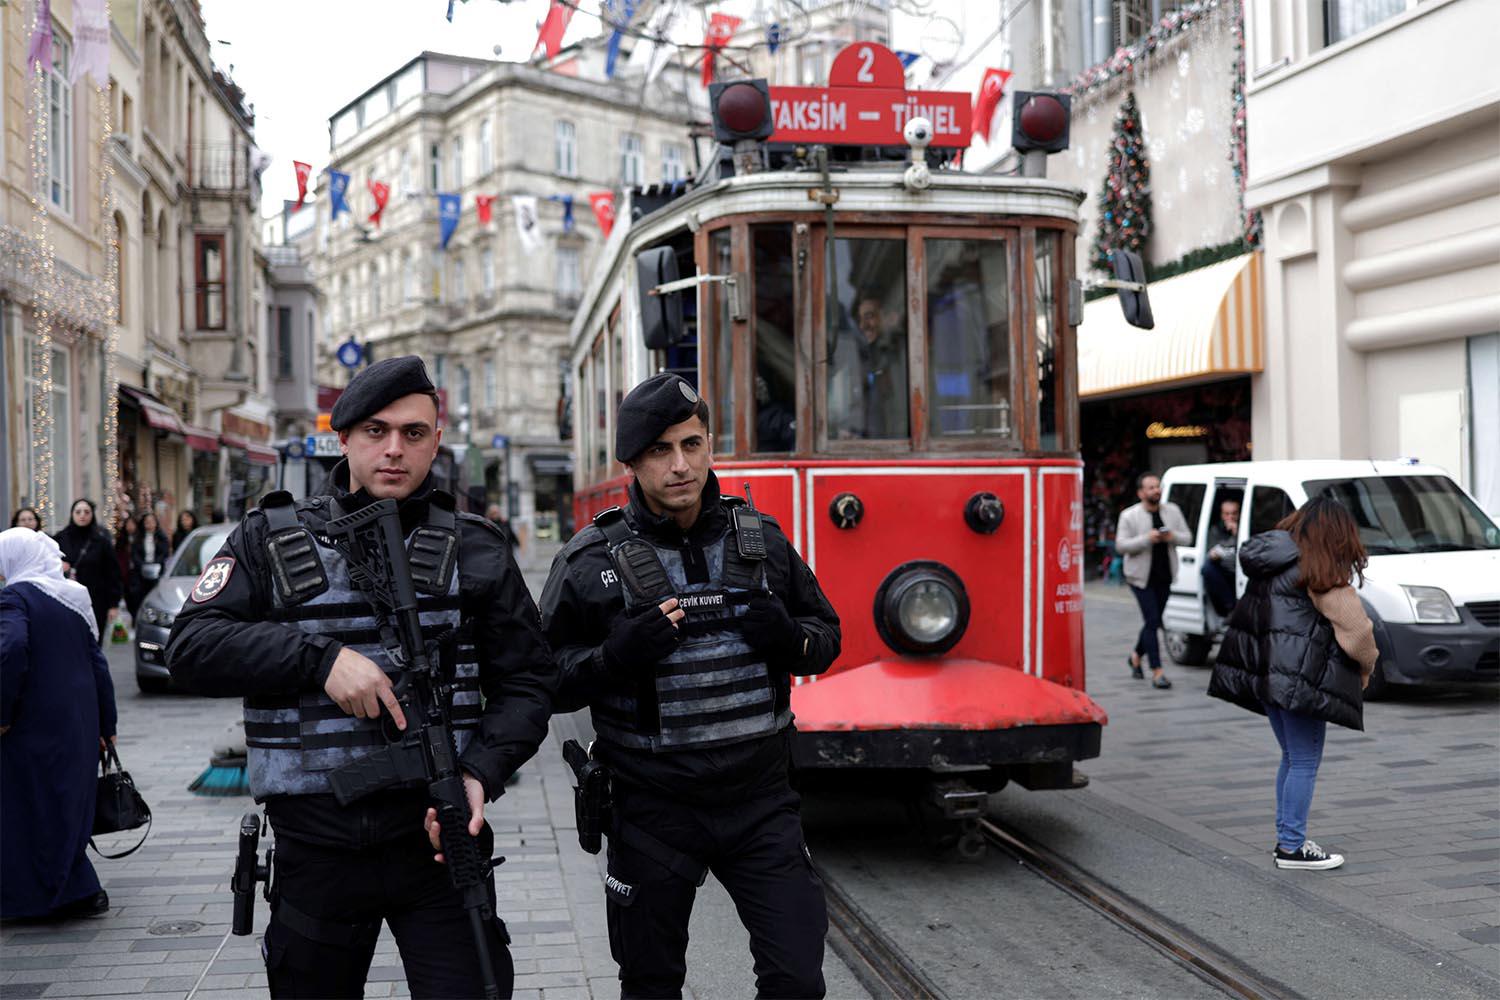 Since January, Turkey has detained or arrested and charged dozens of people suspected of having ties to Mossad